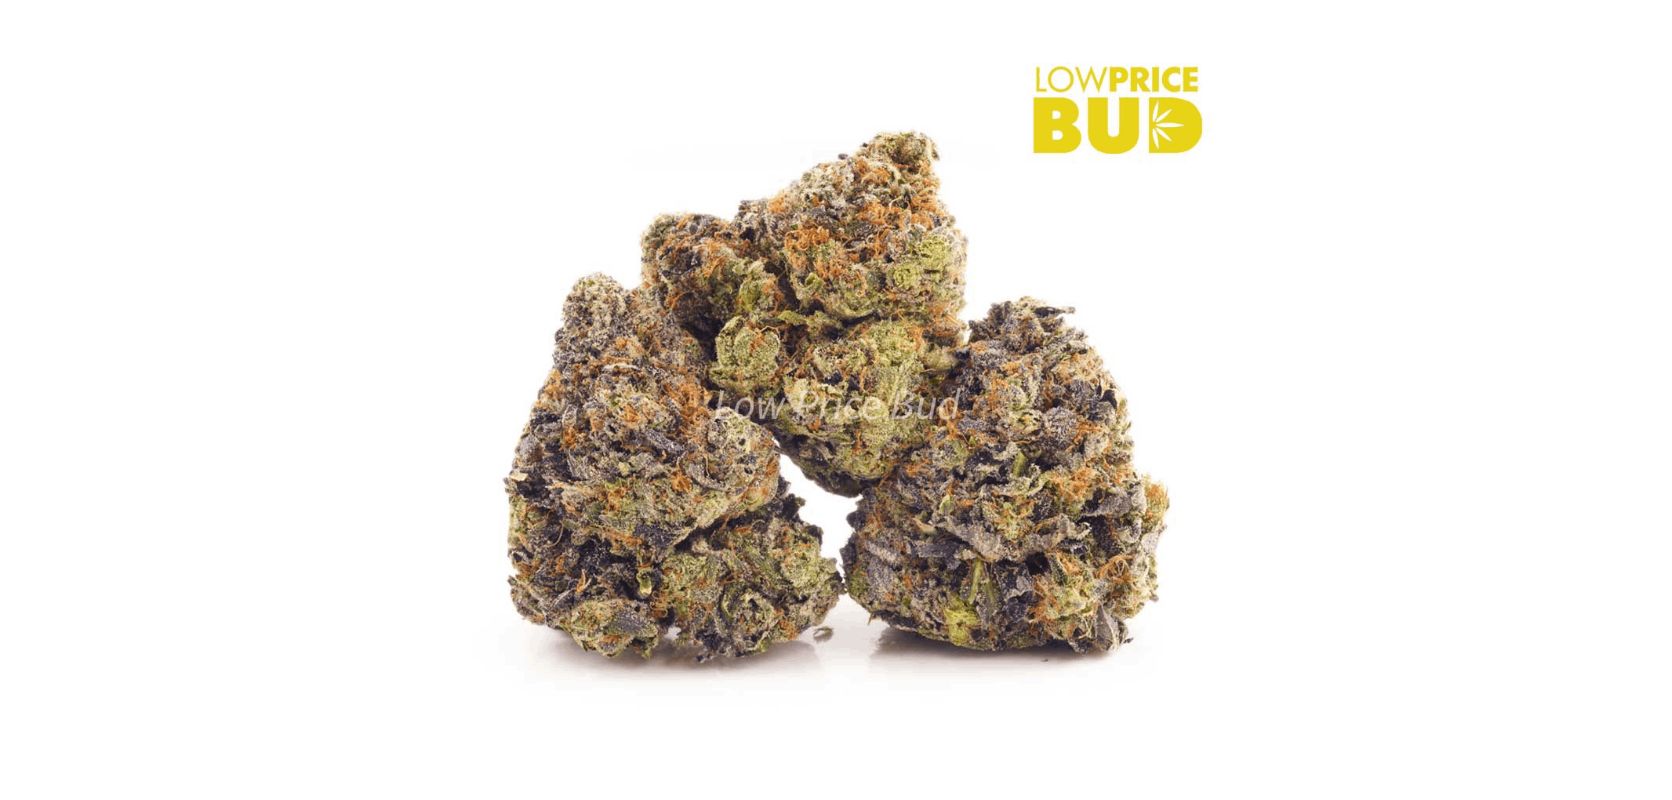 This strain is 80% indica and 20% sativa, so you can expect heavier body effects. This strain is thought to be a cross between the legendary OG Kush and Afghani strains.